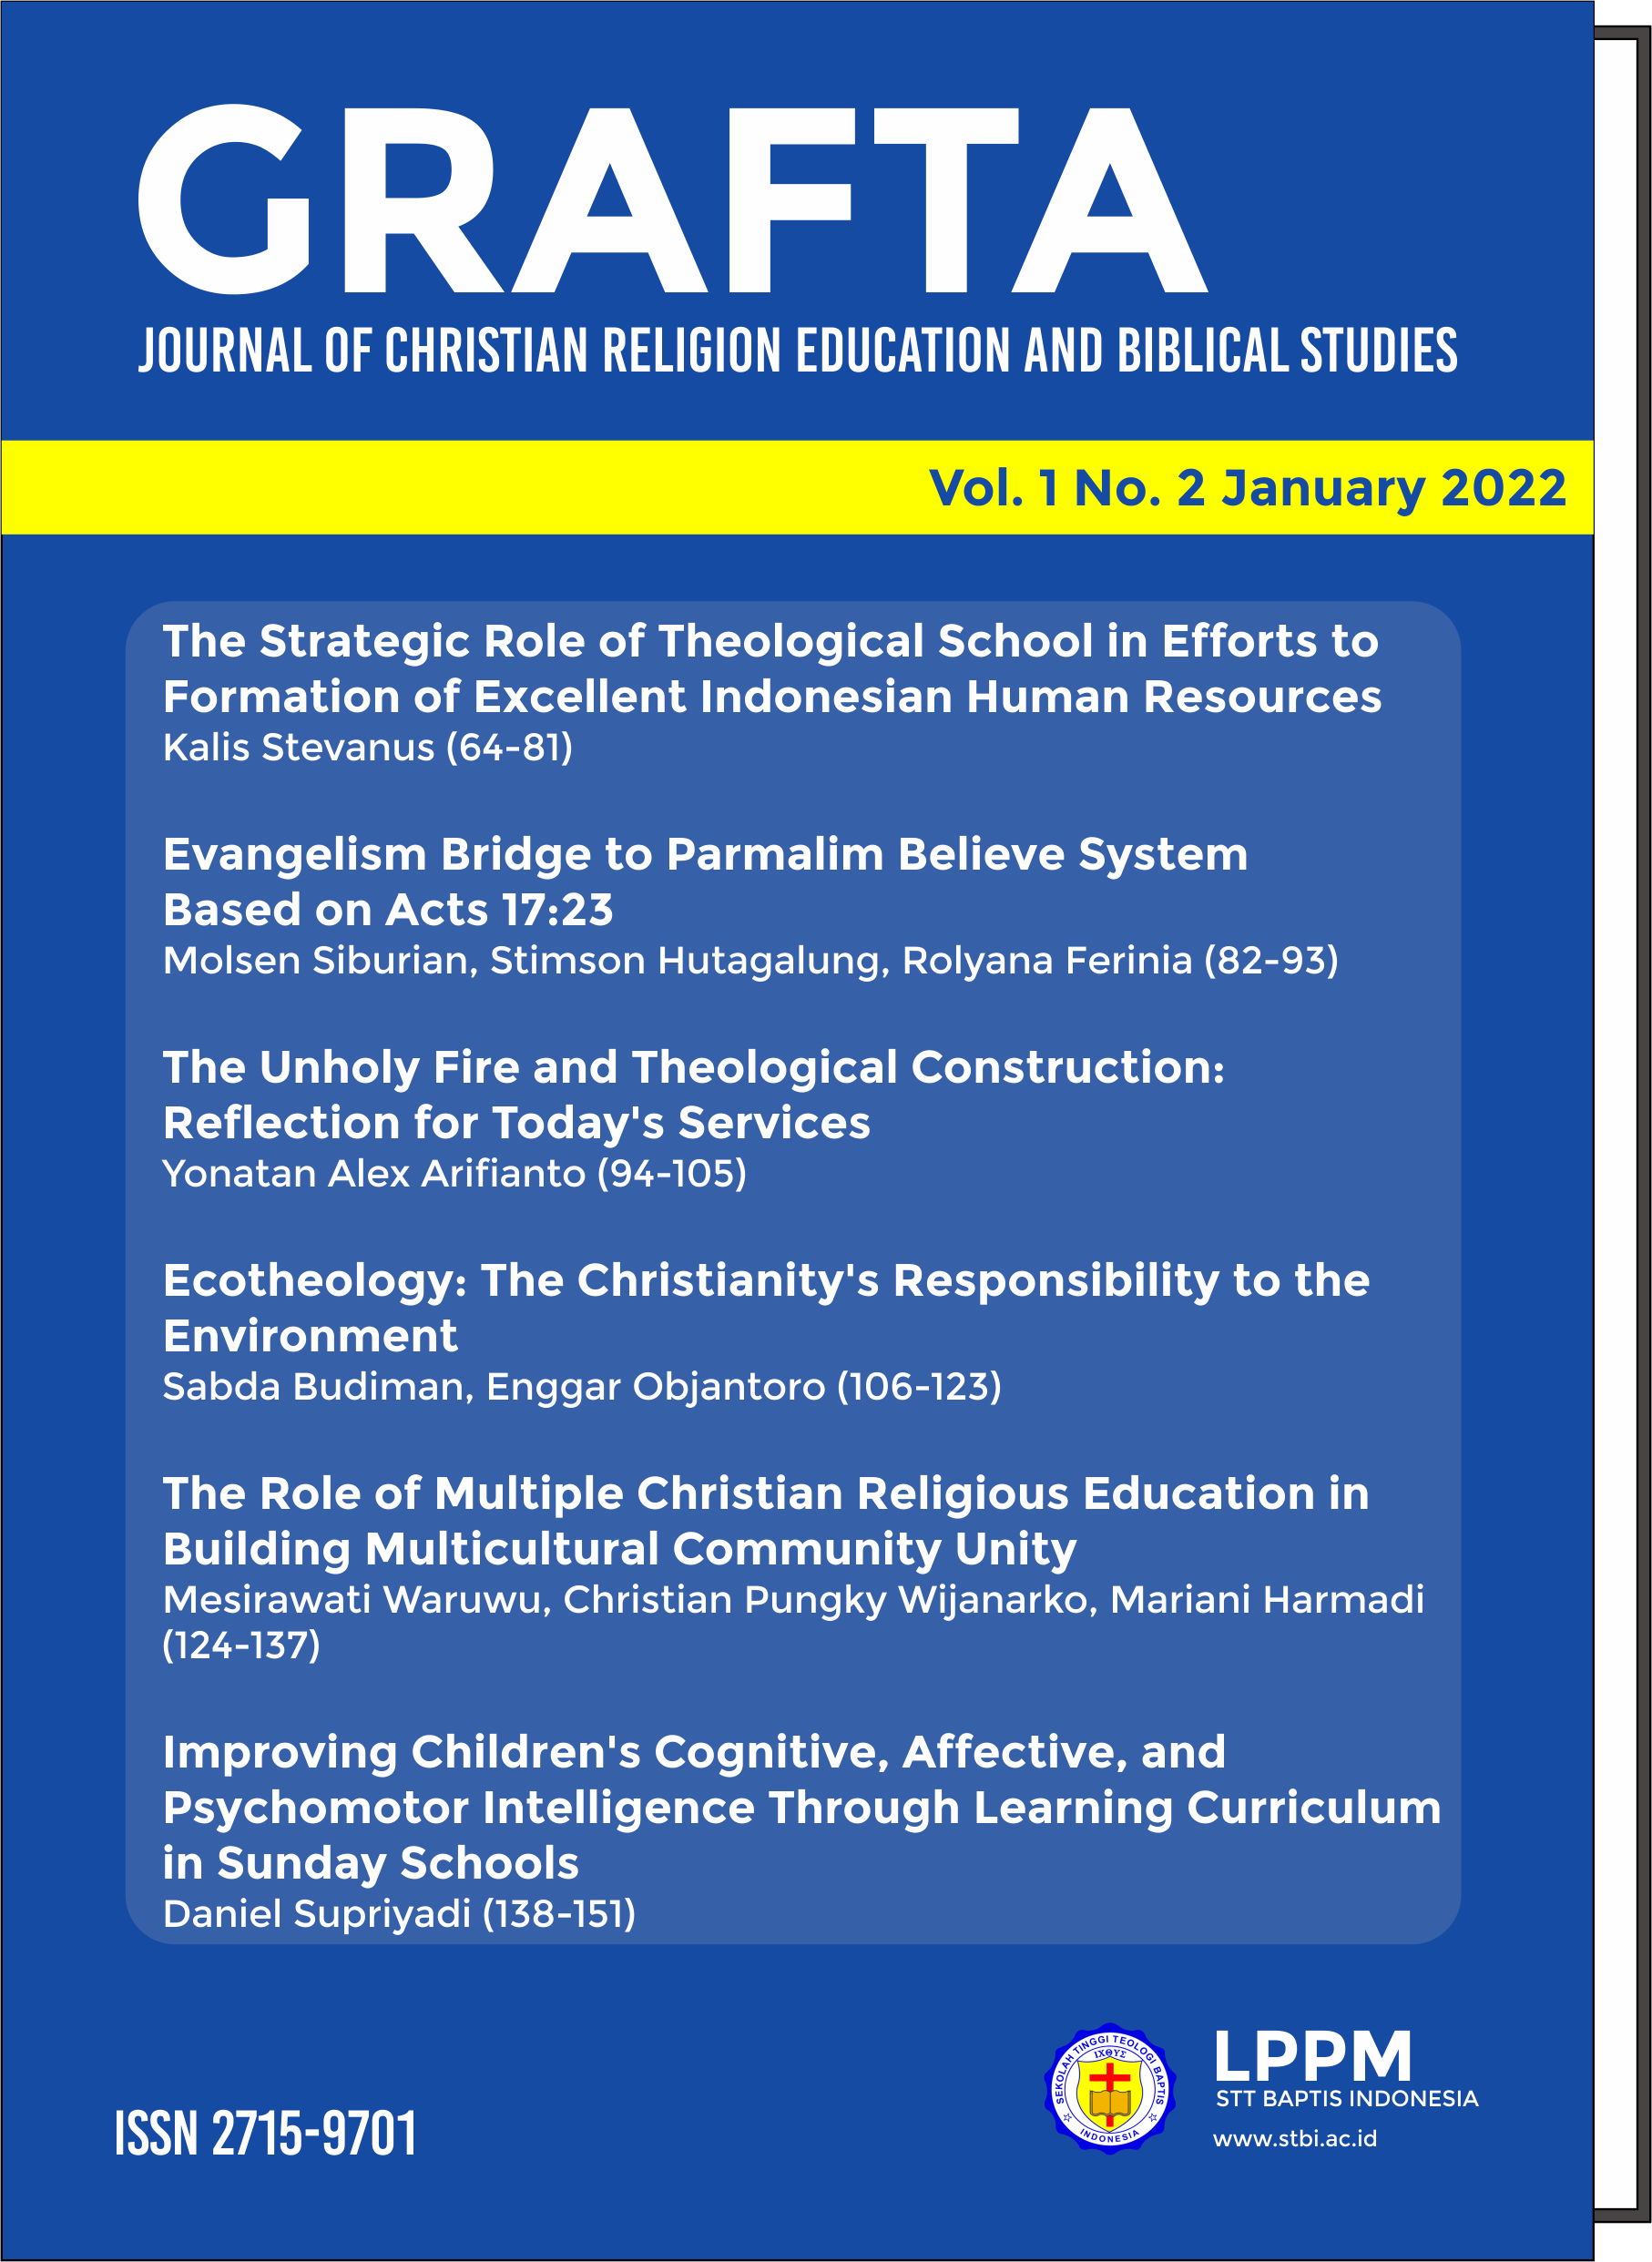 					View Vol. 1 No. 2 (2022): GRAFTA: Journal of Christian Religion Education and Biblical Studies
				